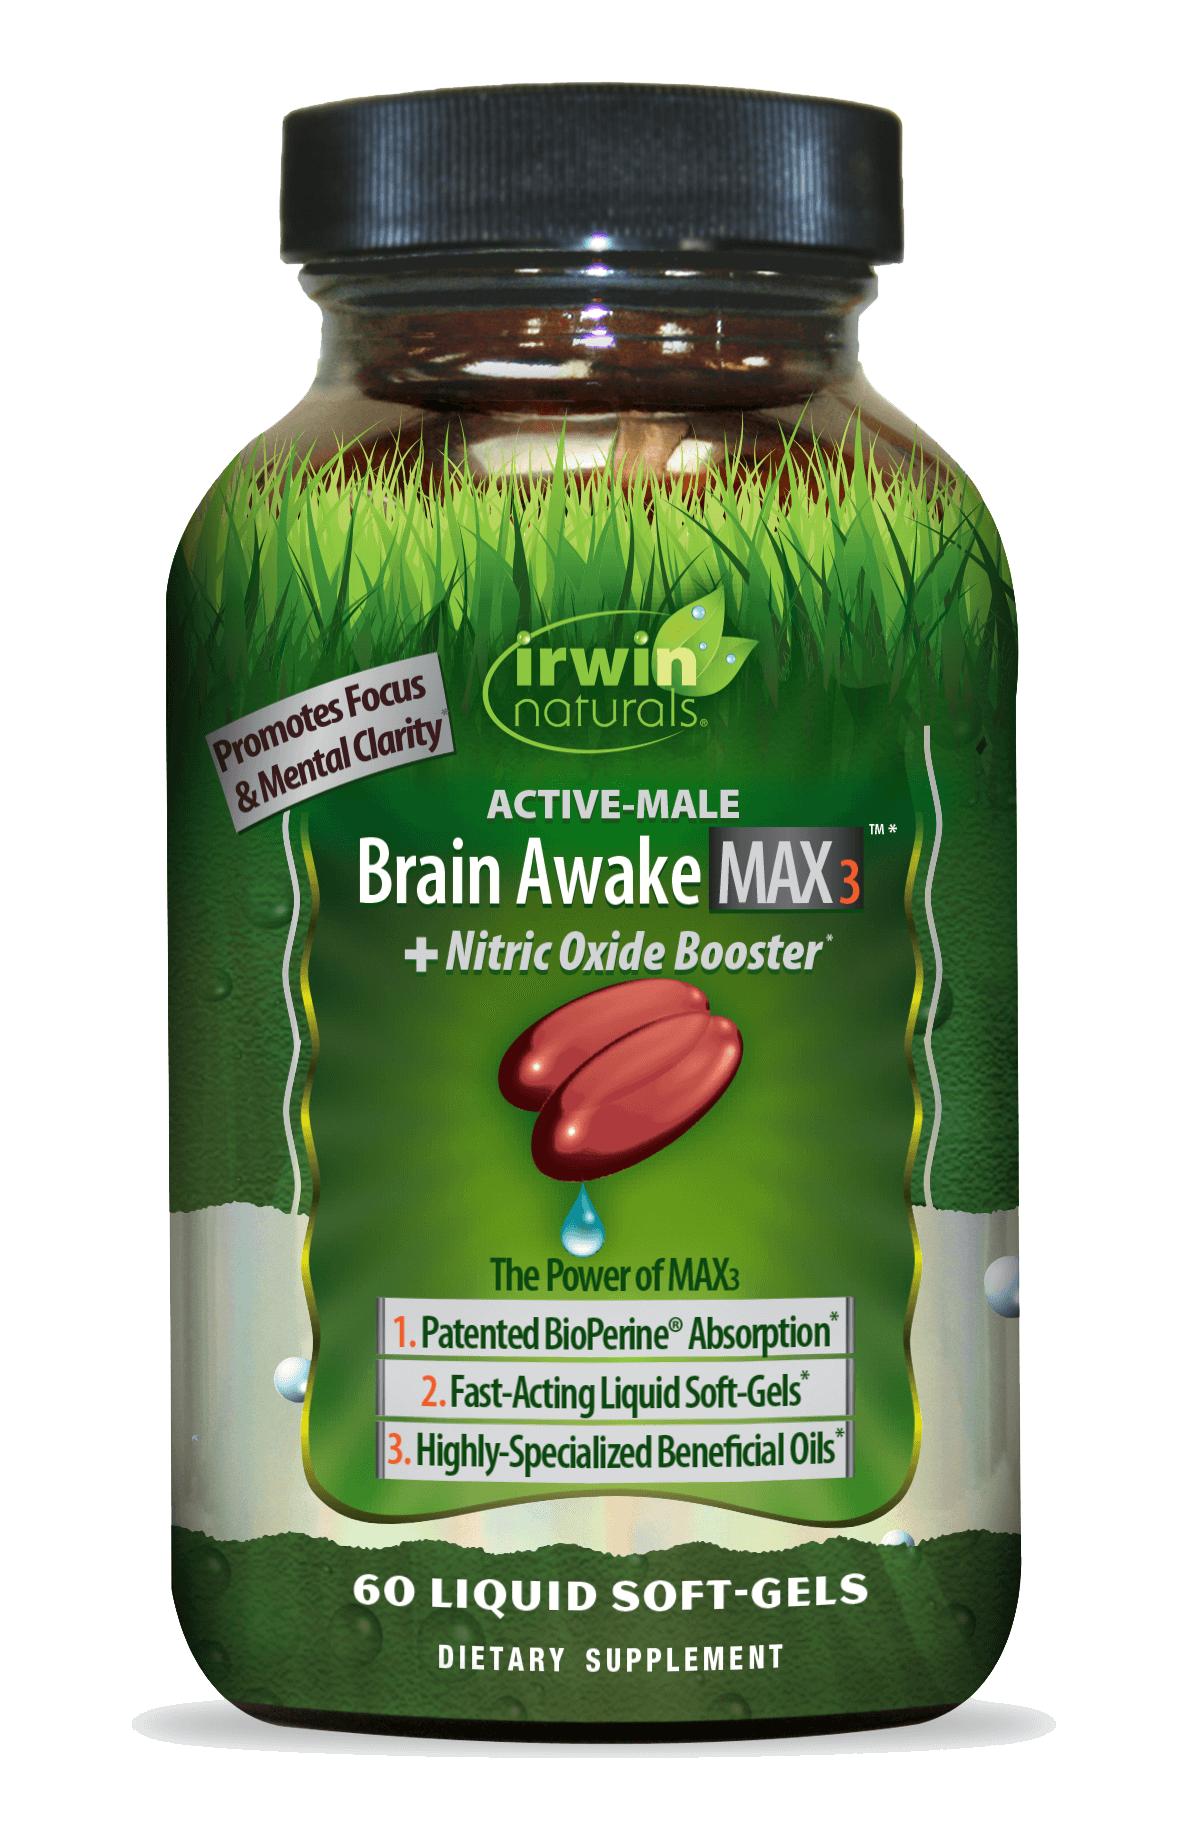 Active-Male Brain Awake Max3 with Nitric Oxide Booster Irwin Naturals